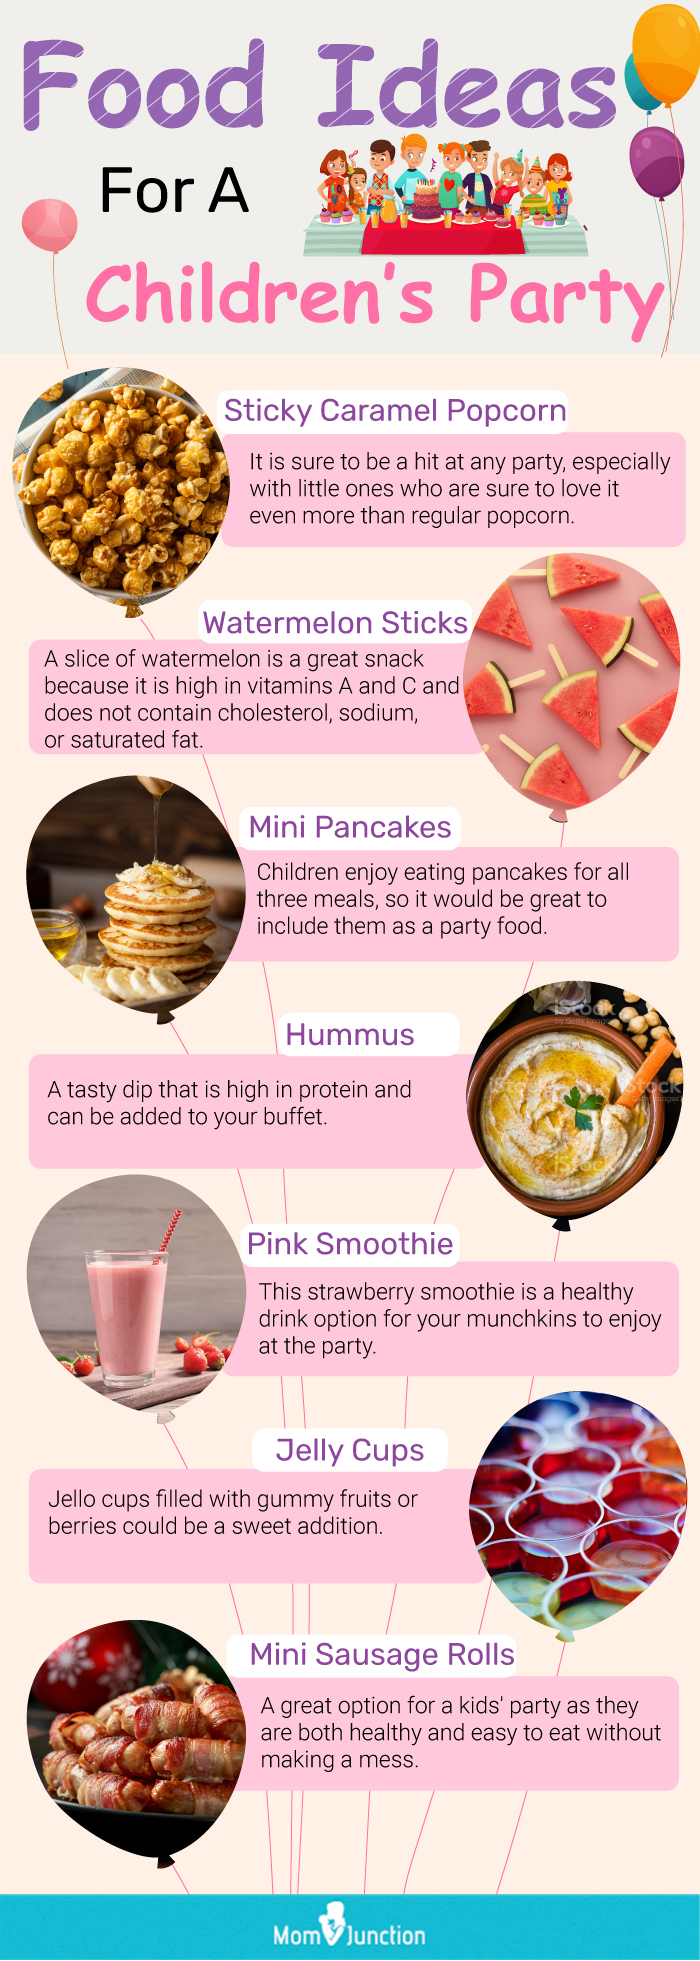 party food ideas for children [infographic]